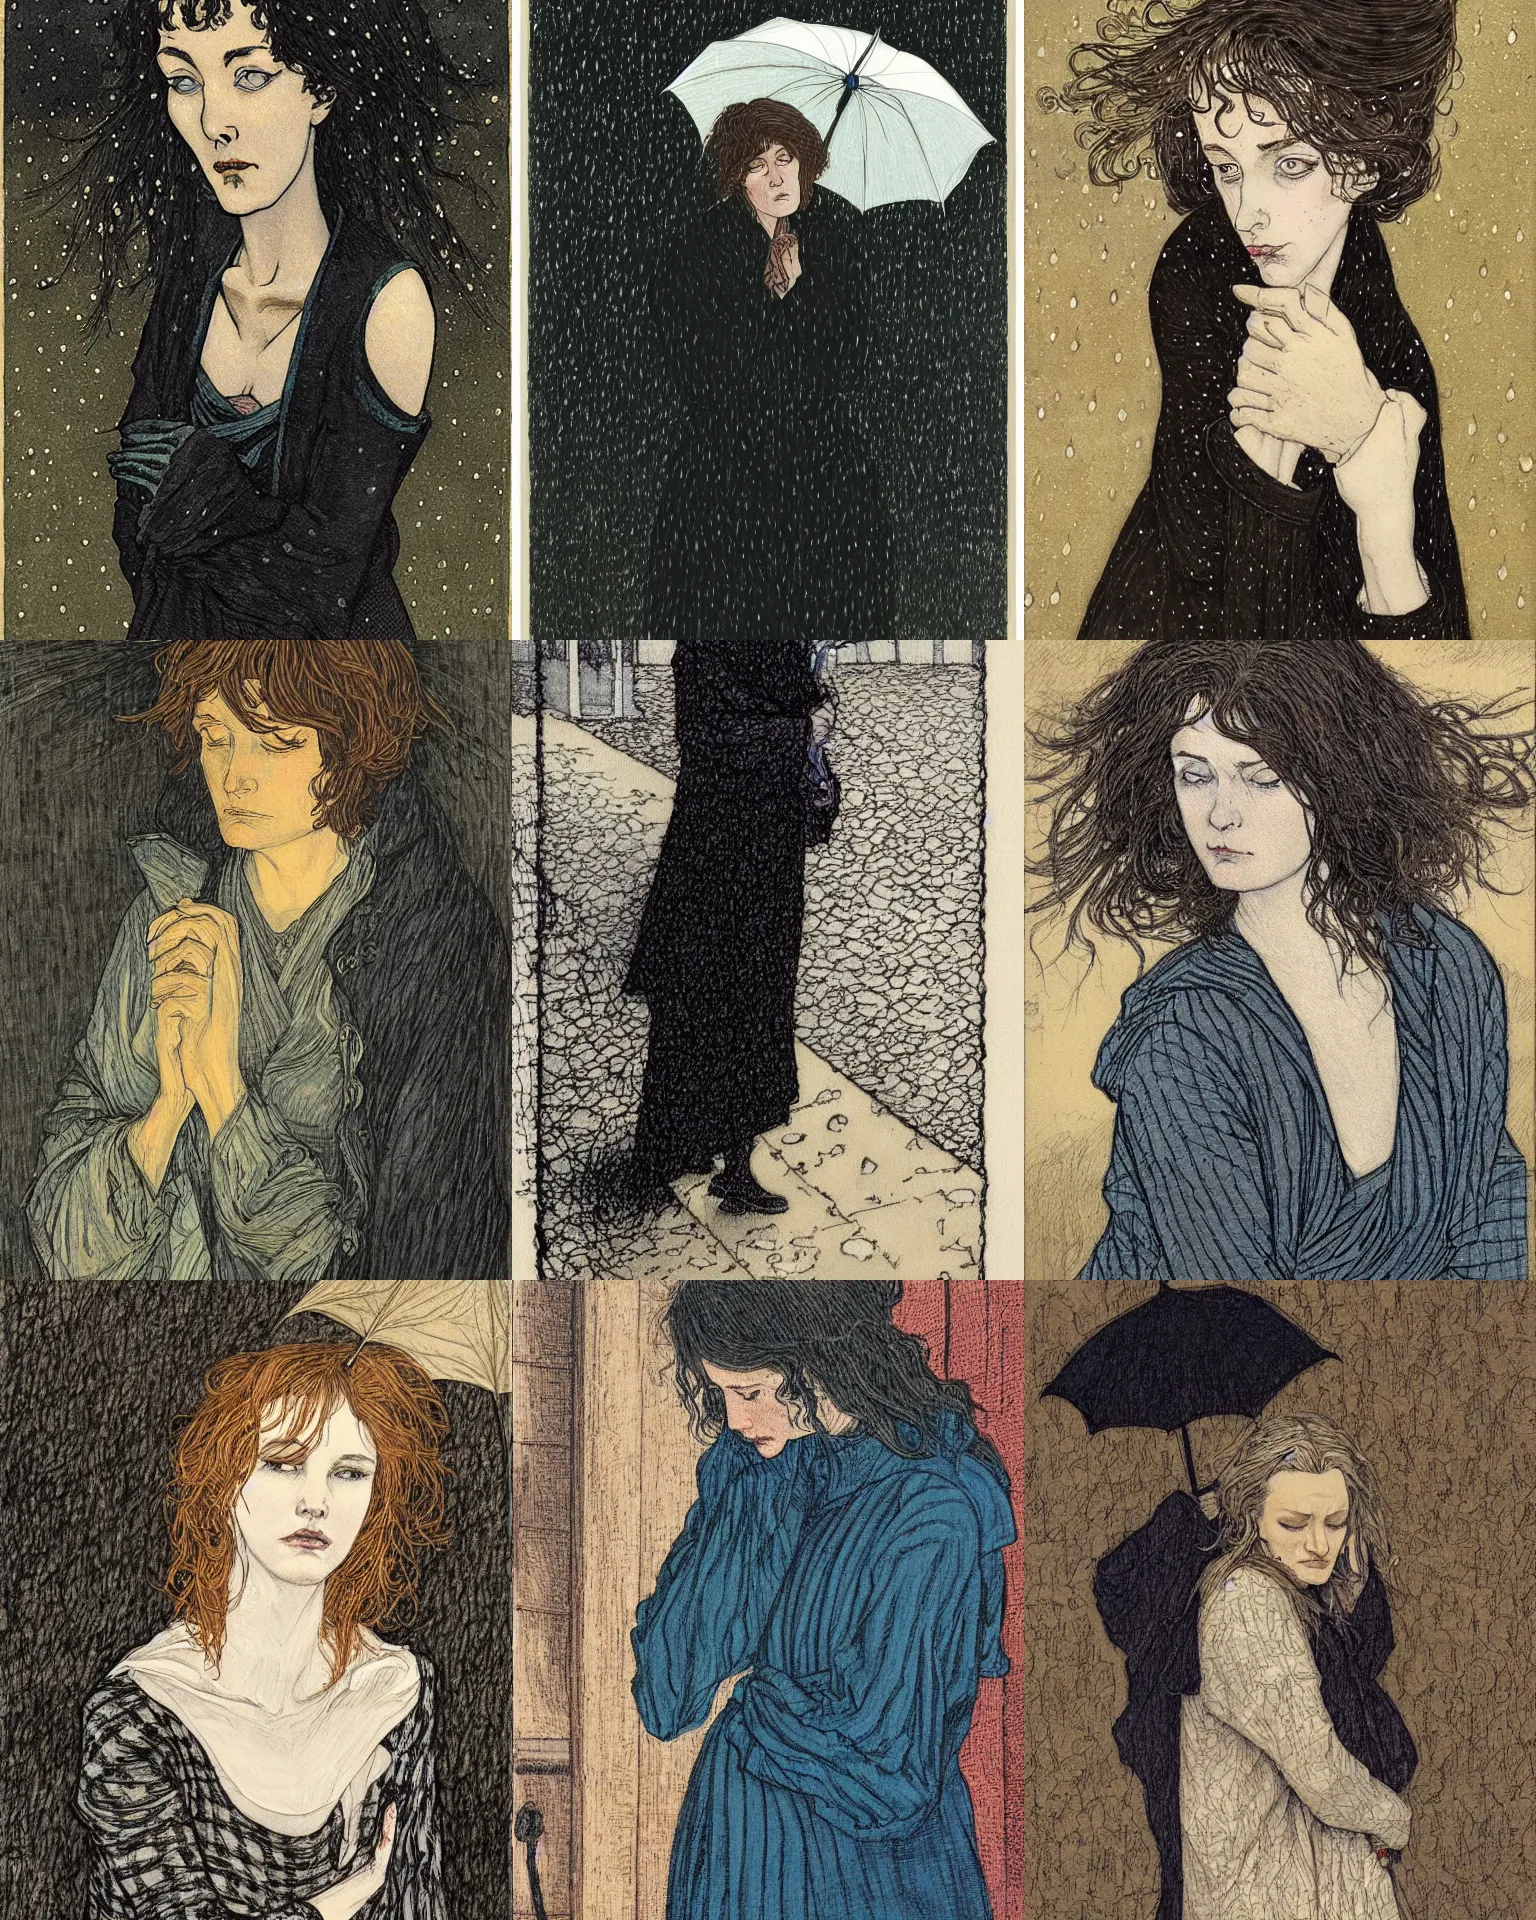 Prompt: portrait of a sad middle - aged woman by rebecca guay, rain, street at night, melancholy